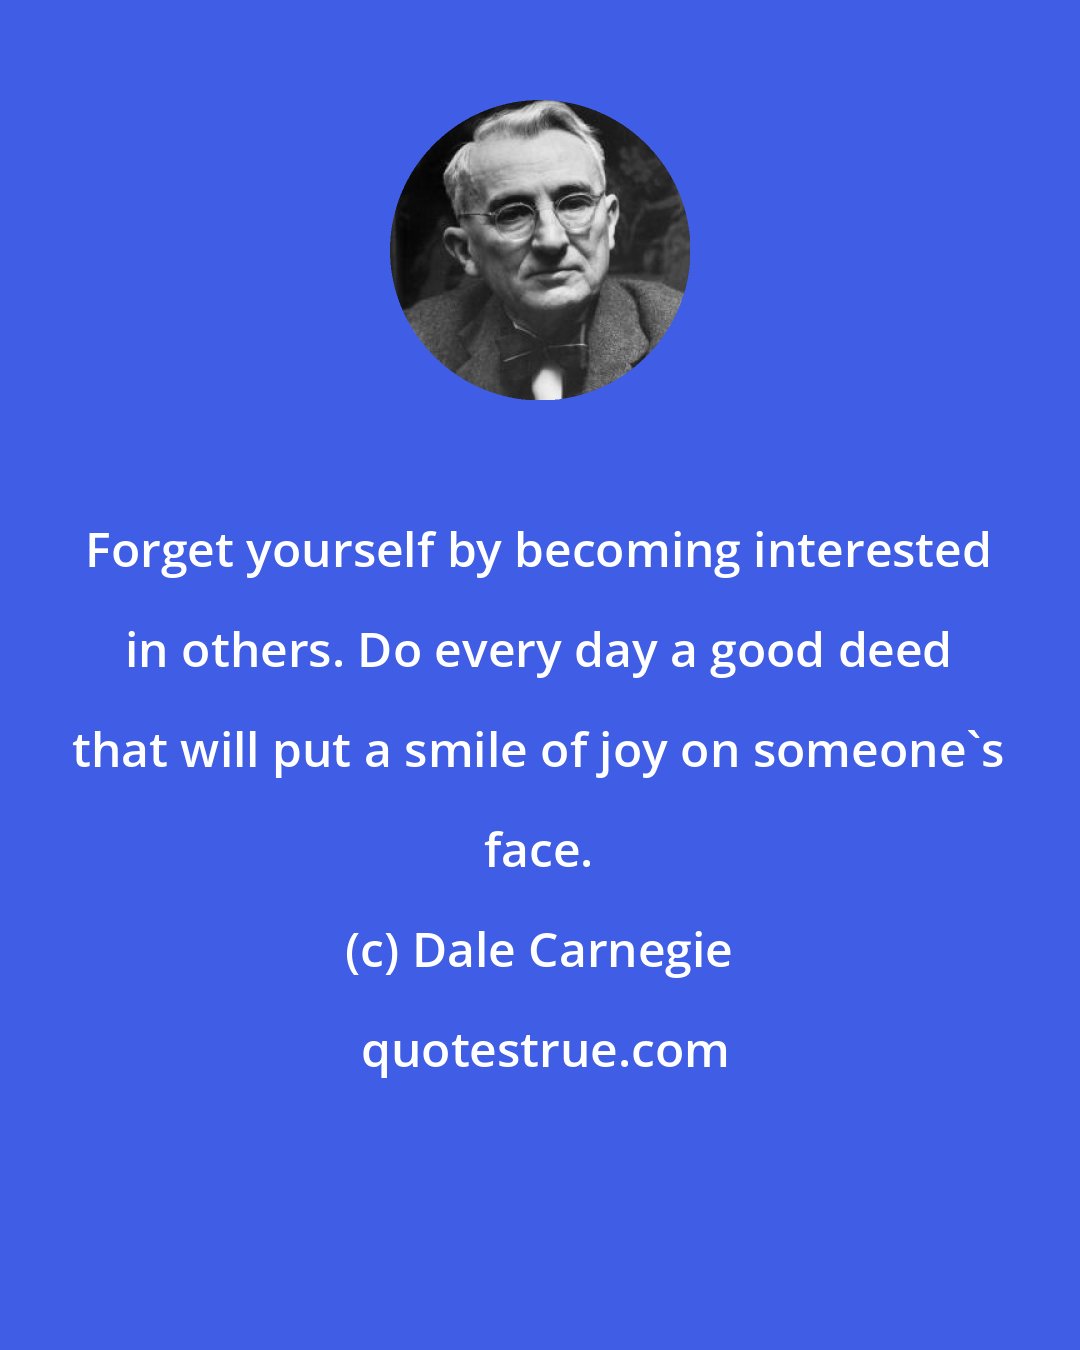 Dale Carnegie: Forget yourself by becoming interested in others. Do every day a good deed that will put a smile of joy on someone's face.